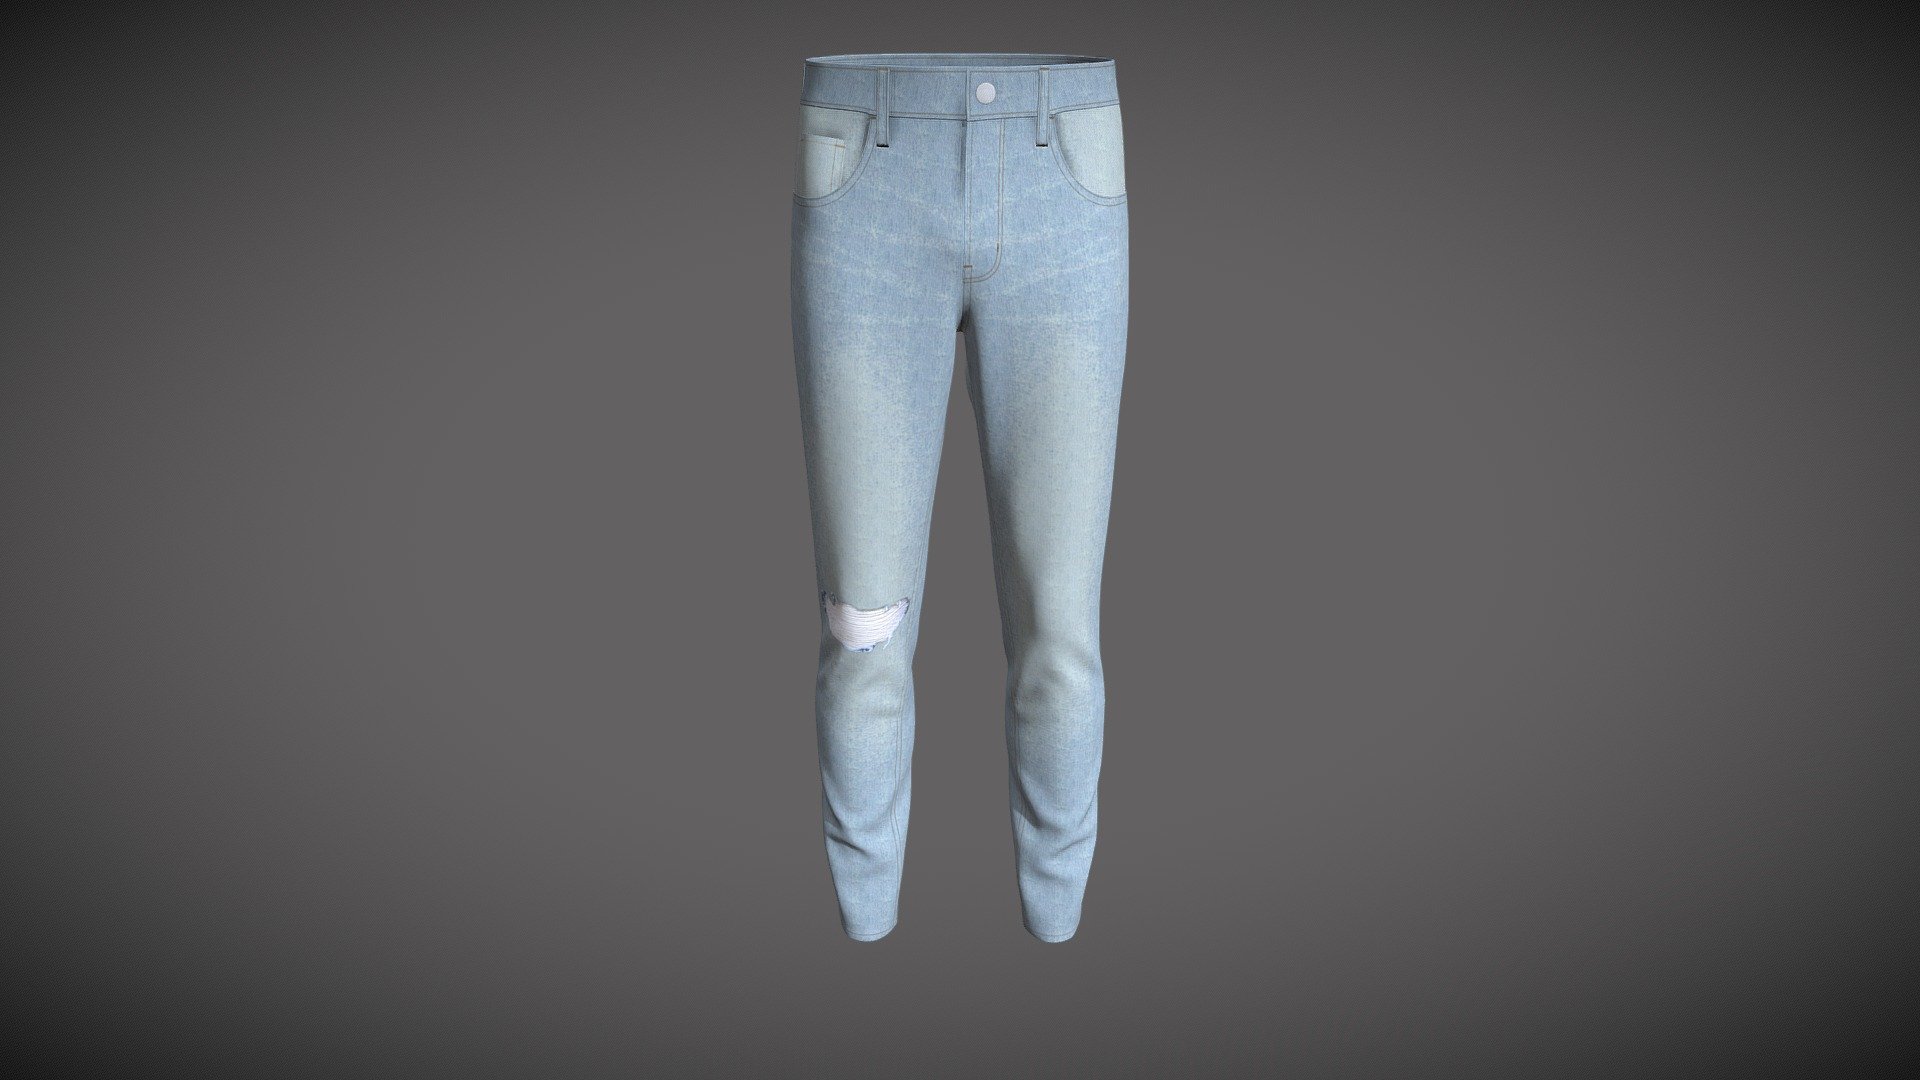 Cloth Title = Men’s Denim Pant Light Blue 

SKU = DG100066 

Category = Men 

Product Type = Pant 

Cloth Length = Regular 

Body Fit = Regular Fit 

Occasion = Casual  

Waist Rise = High Rise


Our Services:

3D Apparel Design.

OBJ,FBX,GLTF Making with High/Low Poly.

Fabric Digitalization.

Mockup making.

3D Teck Pack.

Pattern Making.

2D Illustration.

Cloth Animation and 360 Spin Video.


Contact us:- 

Email: info@digitalfashionwear.com 

Website: https://digitalfashionwear.com 

WhatsApp No: +8801759350445 


We designed all the types of cloth specially focused on product visualization, e-commerce, fitting, and production. 

We will design: 

T-shirts 

Polo shirts 

Hoodies 

Sweatshirt 

Jackets 

Shirts 

TankTops 

Trousers 

Bras 

Underwear 

Blazer 

Aprons 

Leggings 

and All Fashion items. 





Our goal is to make sure what we provide you, meets your demand 3d model